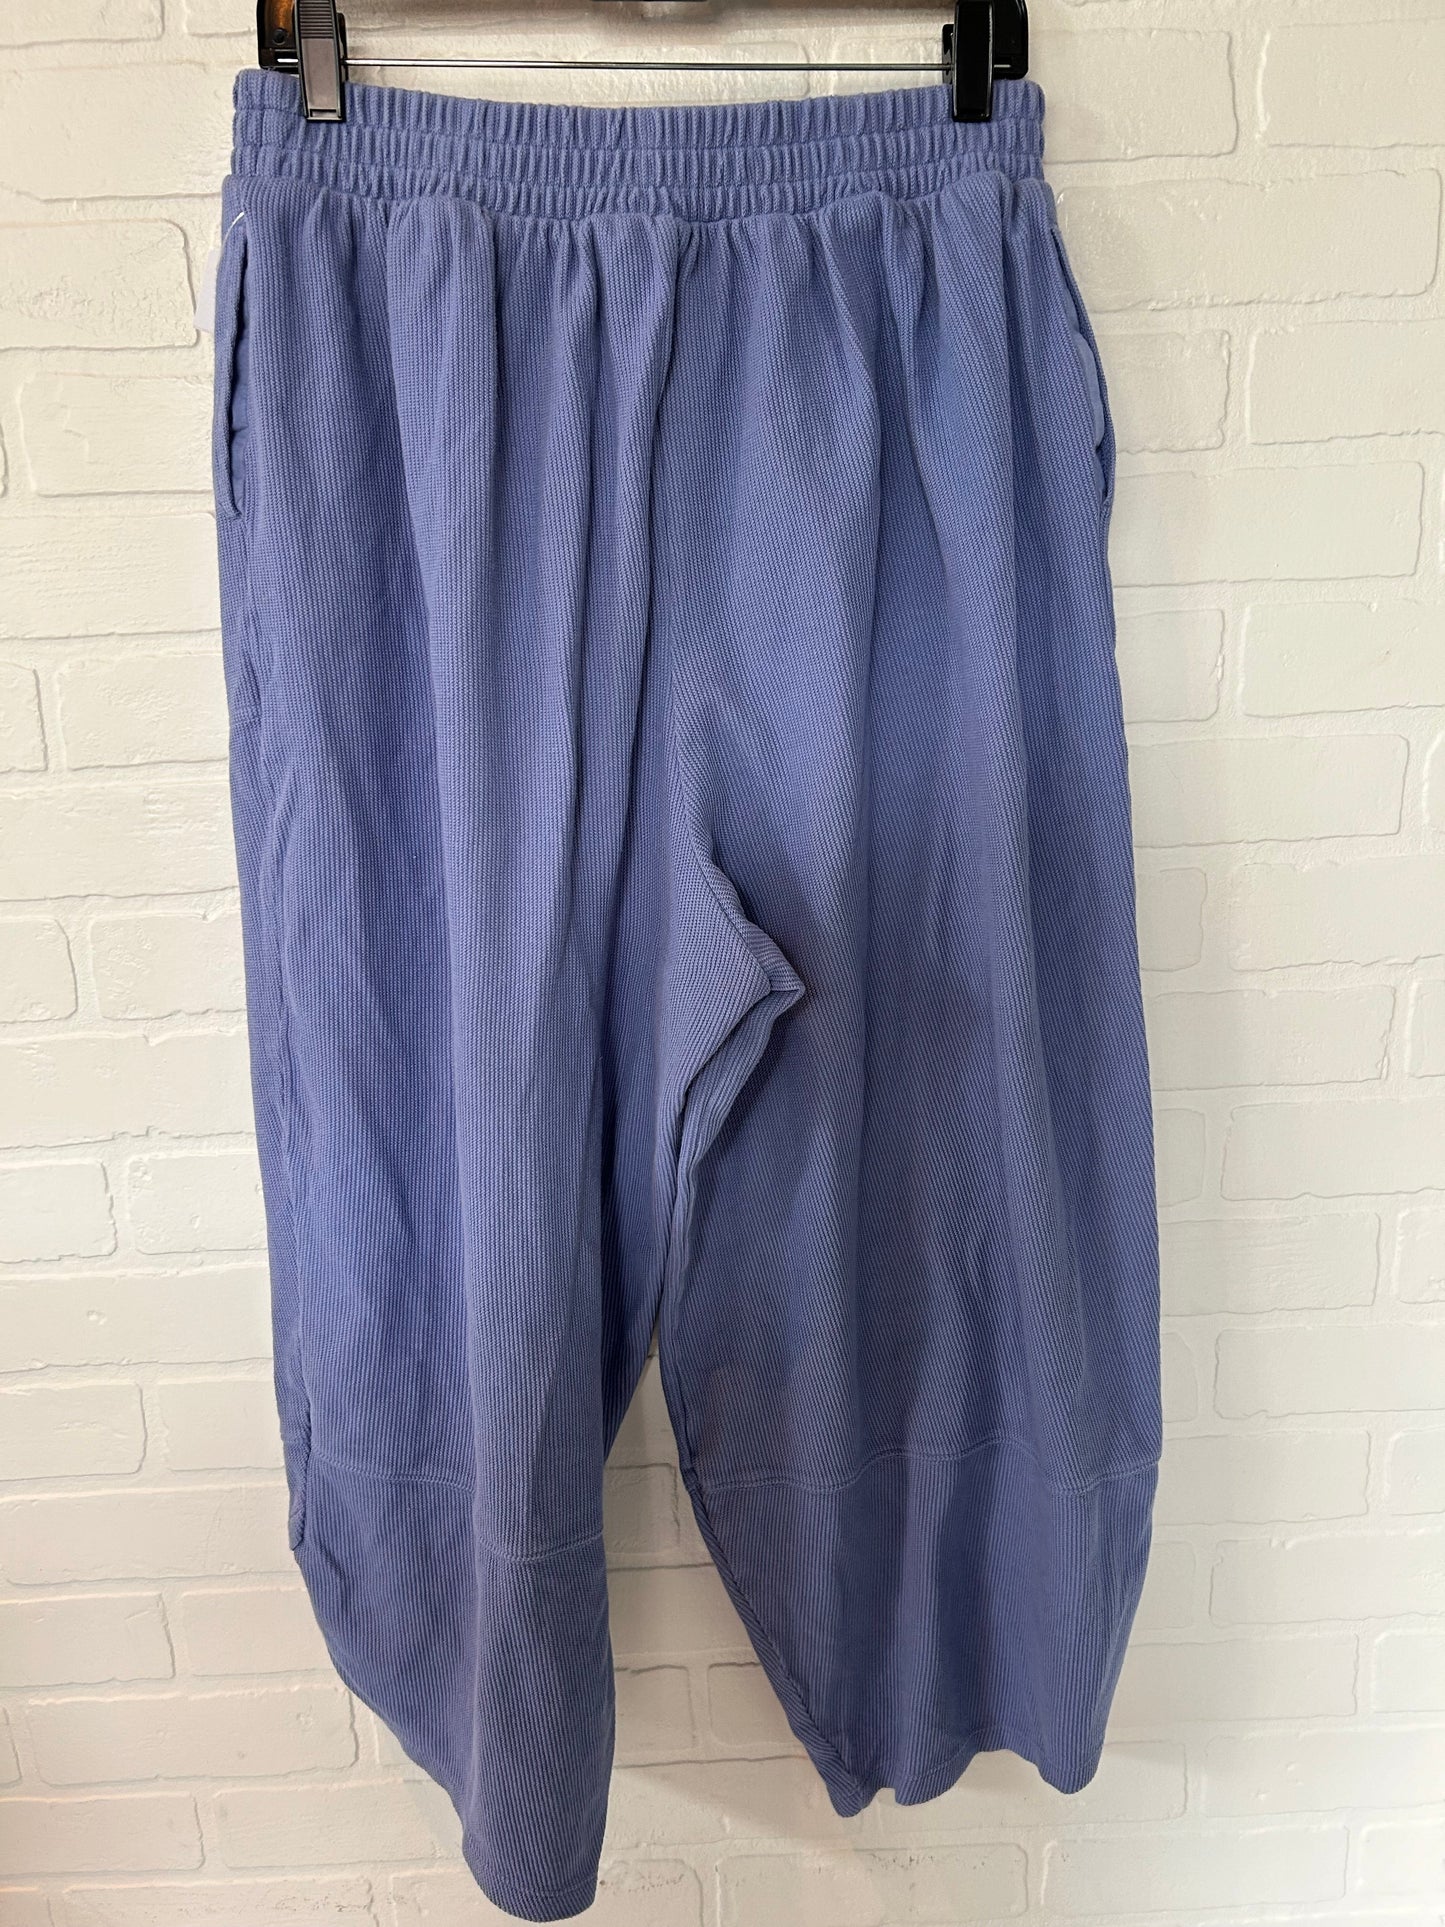 Blue Pants Other Free People, Size 12